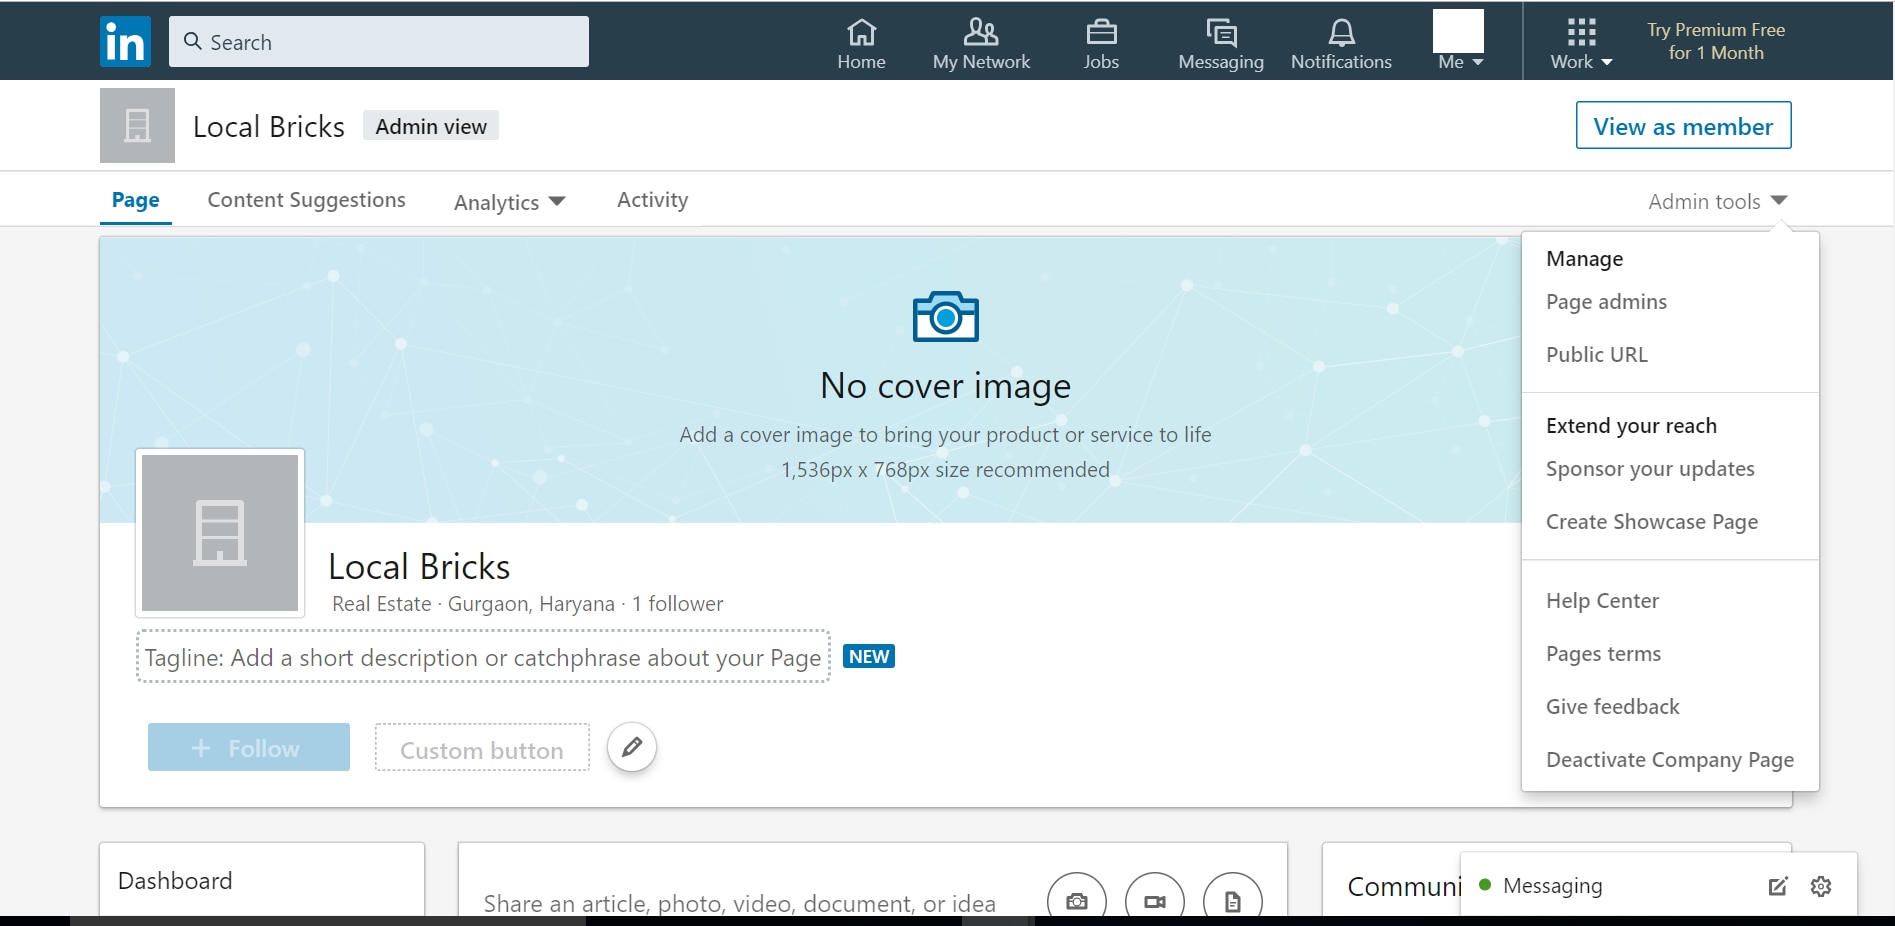 LinkedIn admin page showing various options of the admin tools drop down.